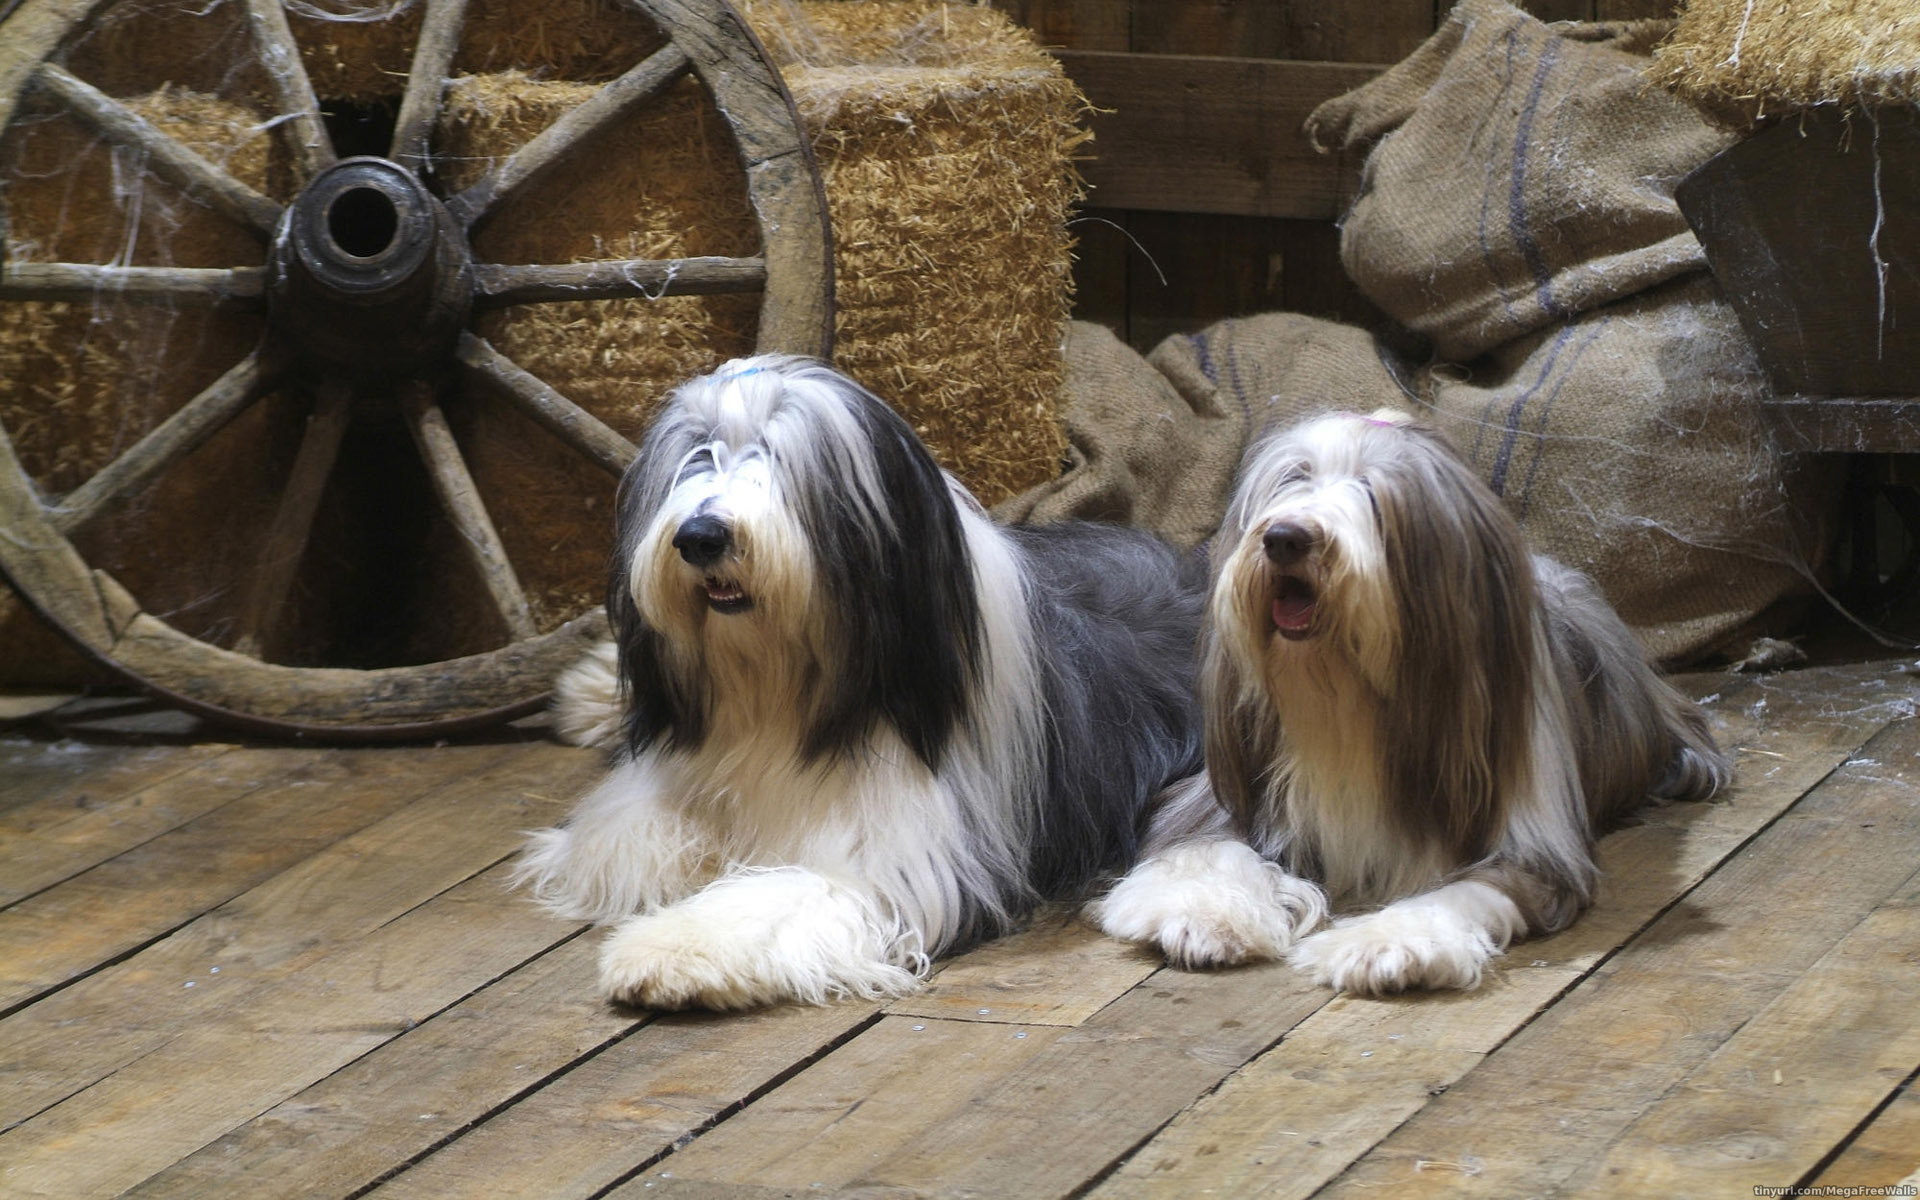 Bearded Collie portrait by Scott Ford